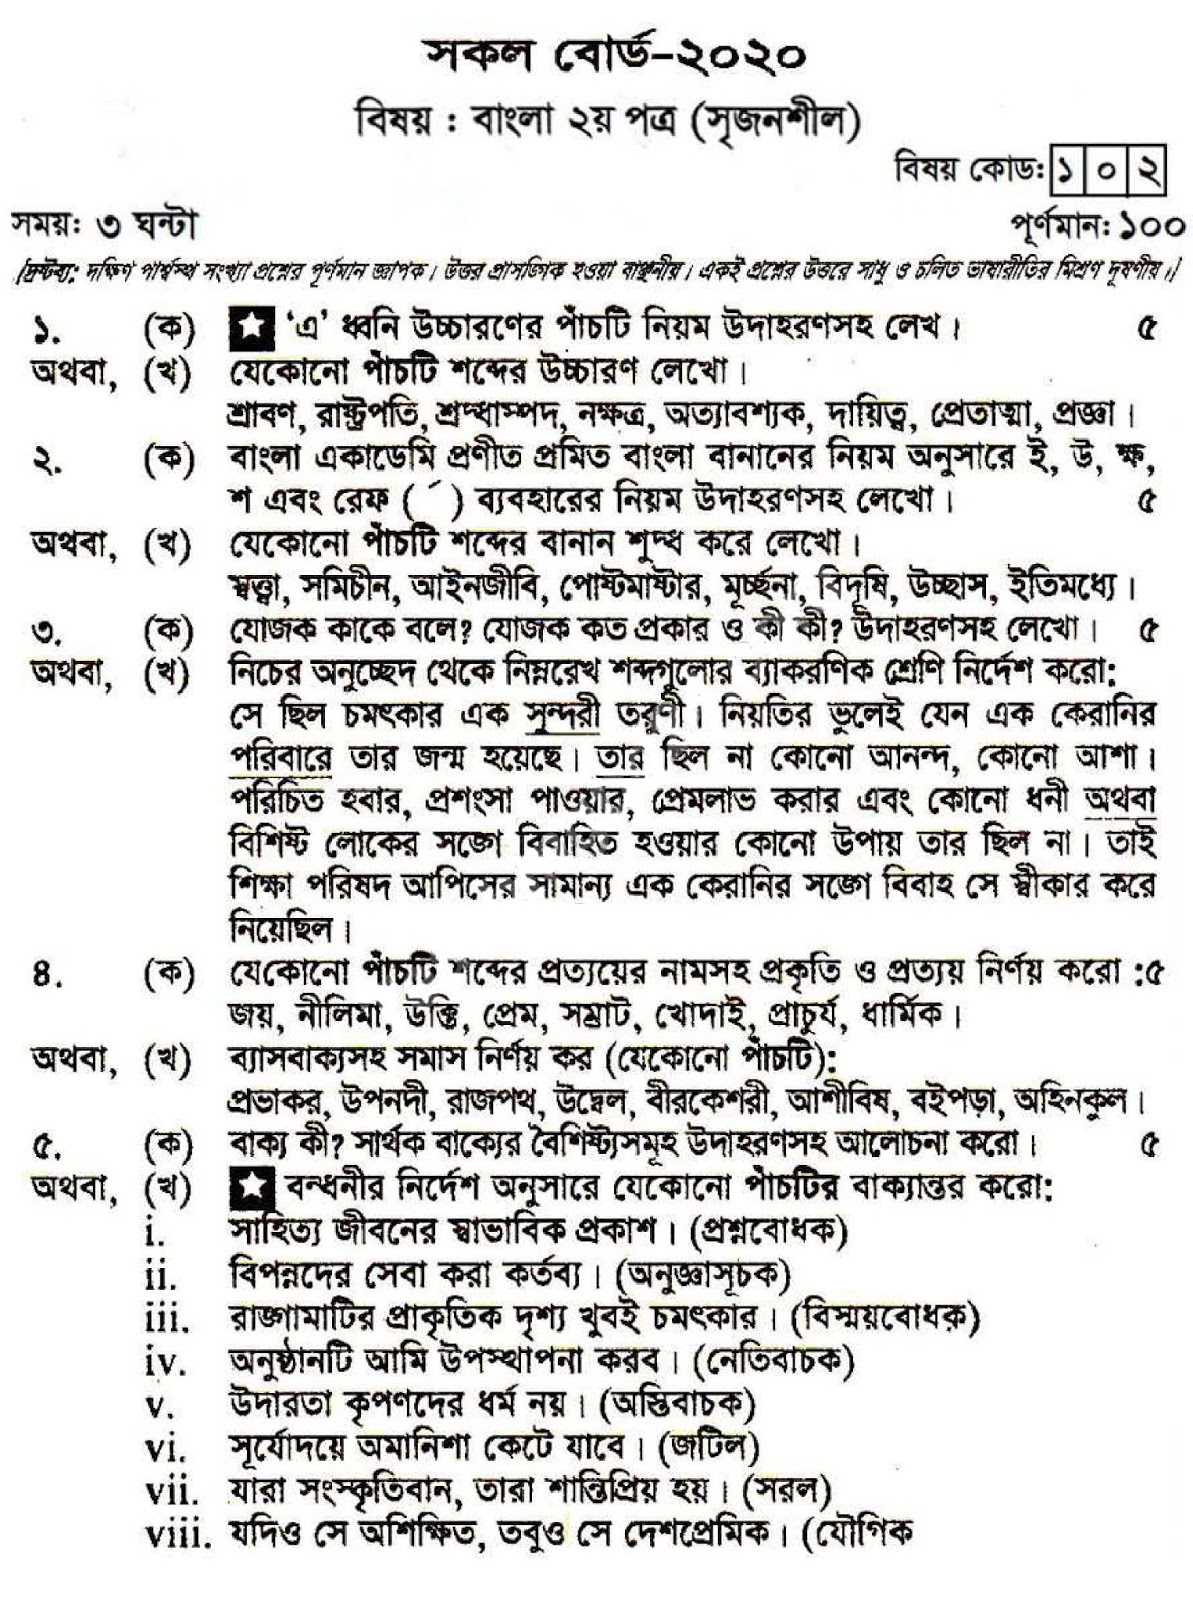 HSC Bangla 2nd Paper Model Question and Suggestions - 1